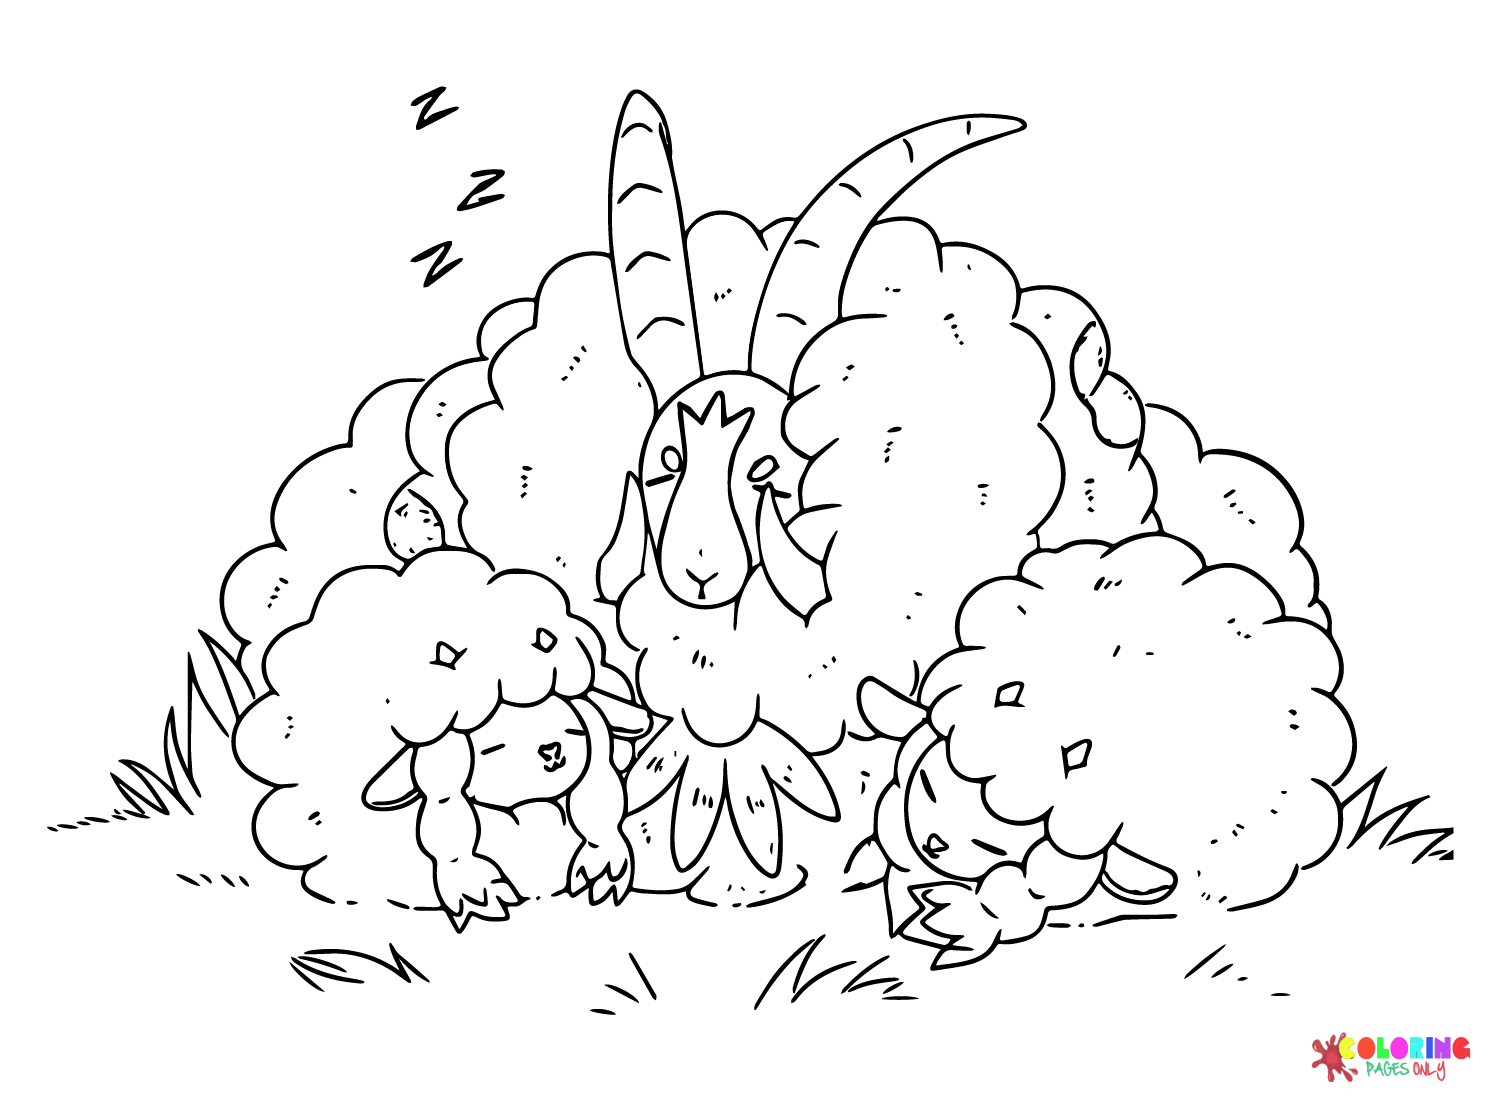 Dubwool and Wooloo Sleep from Dubwool